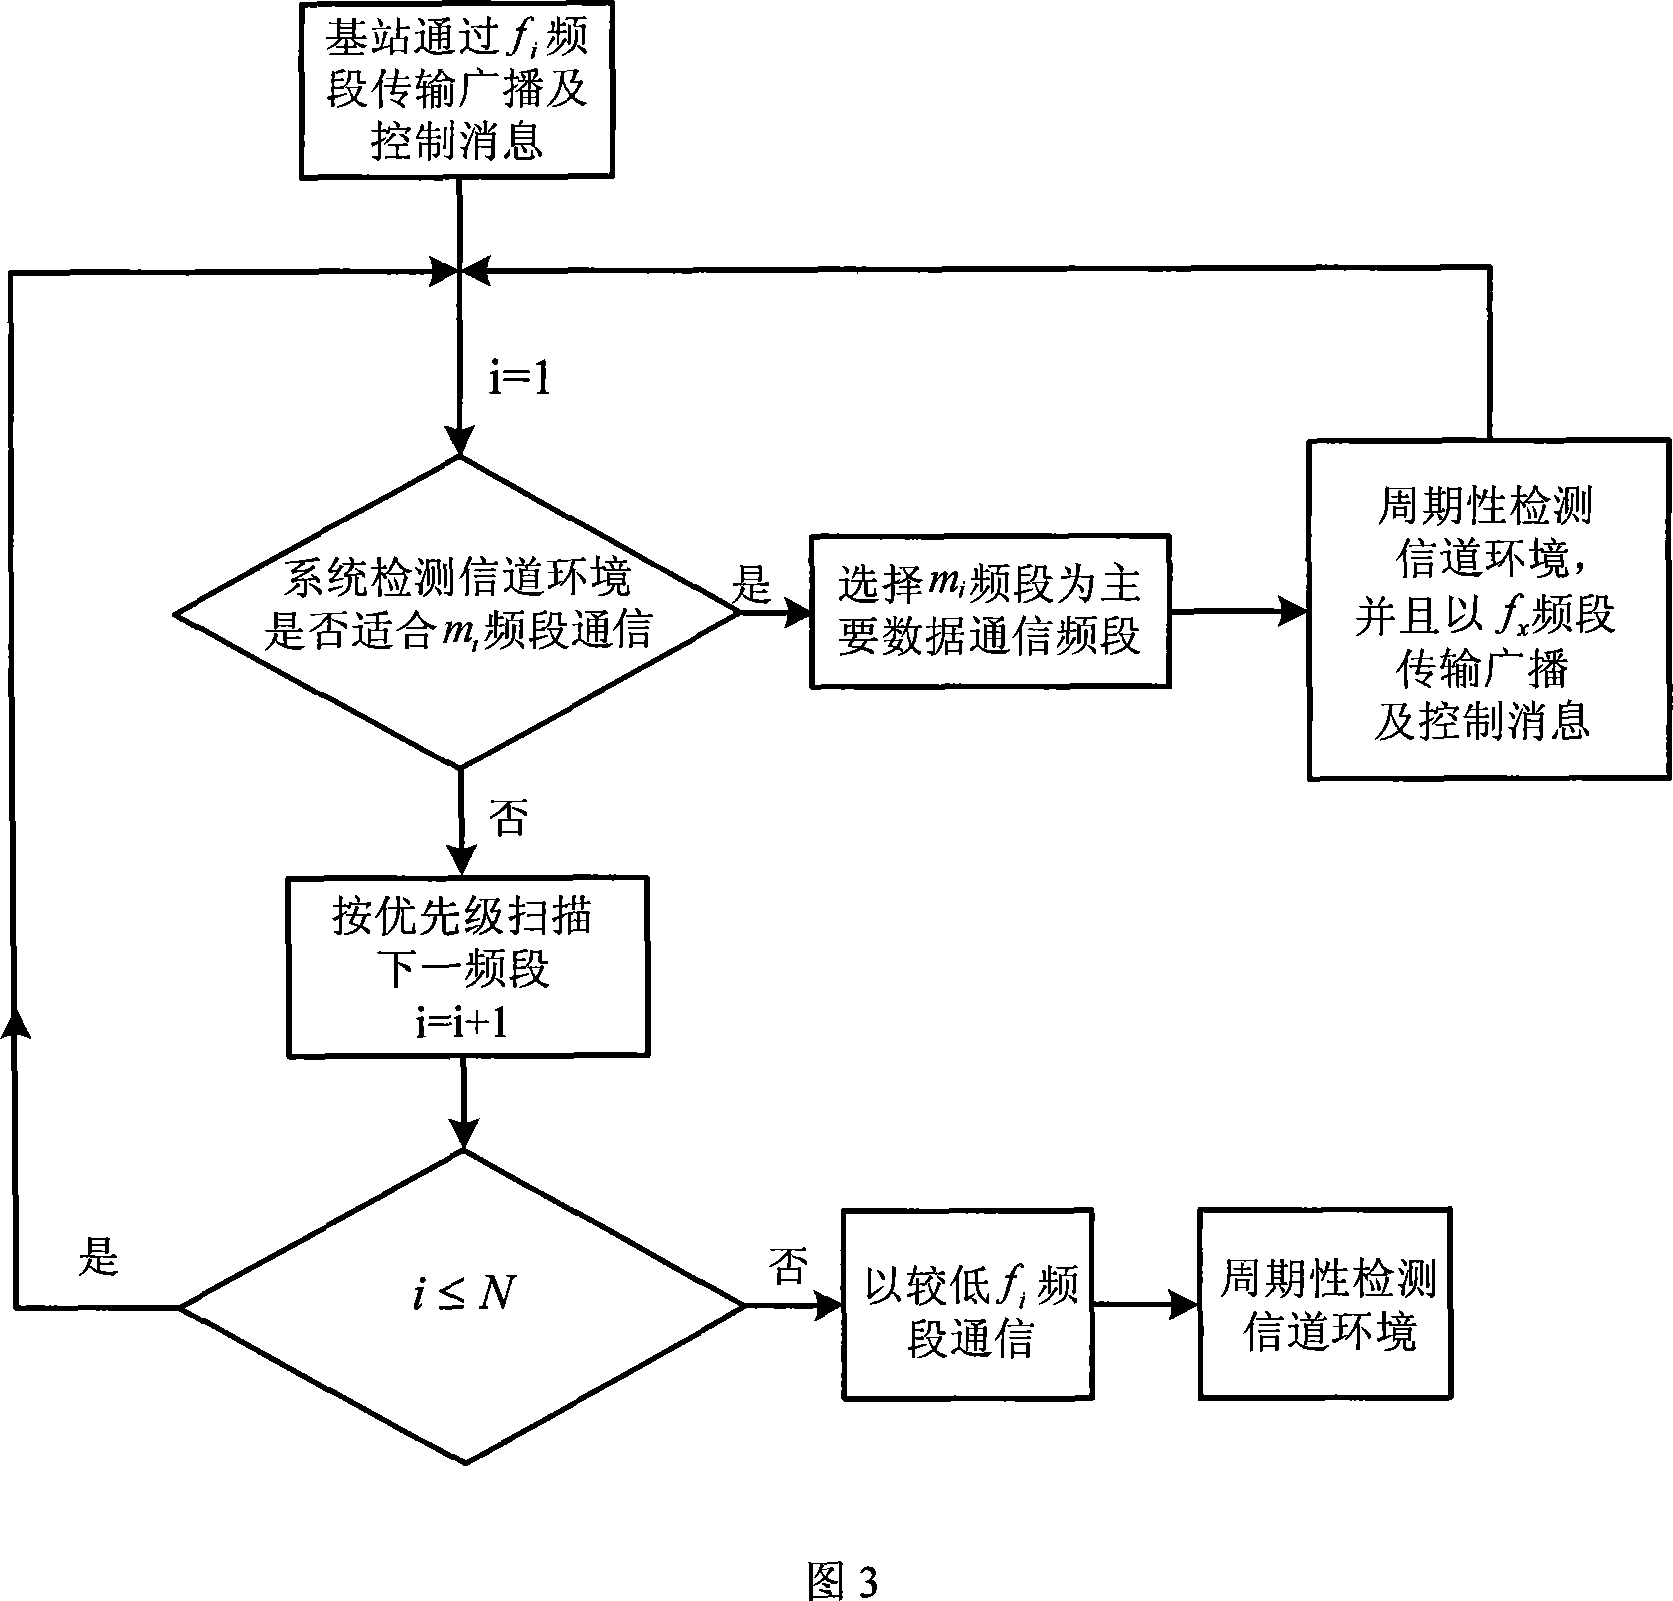 Multi-frequency band wireless communication method